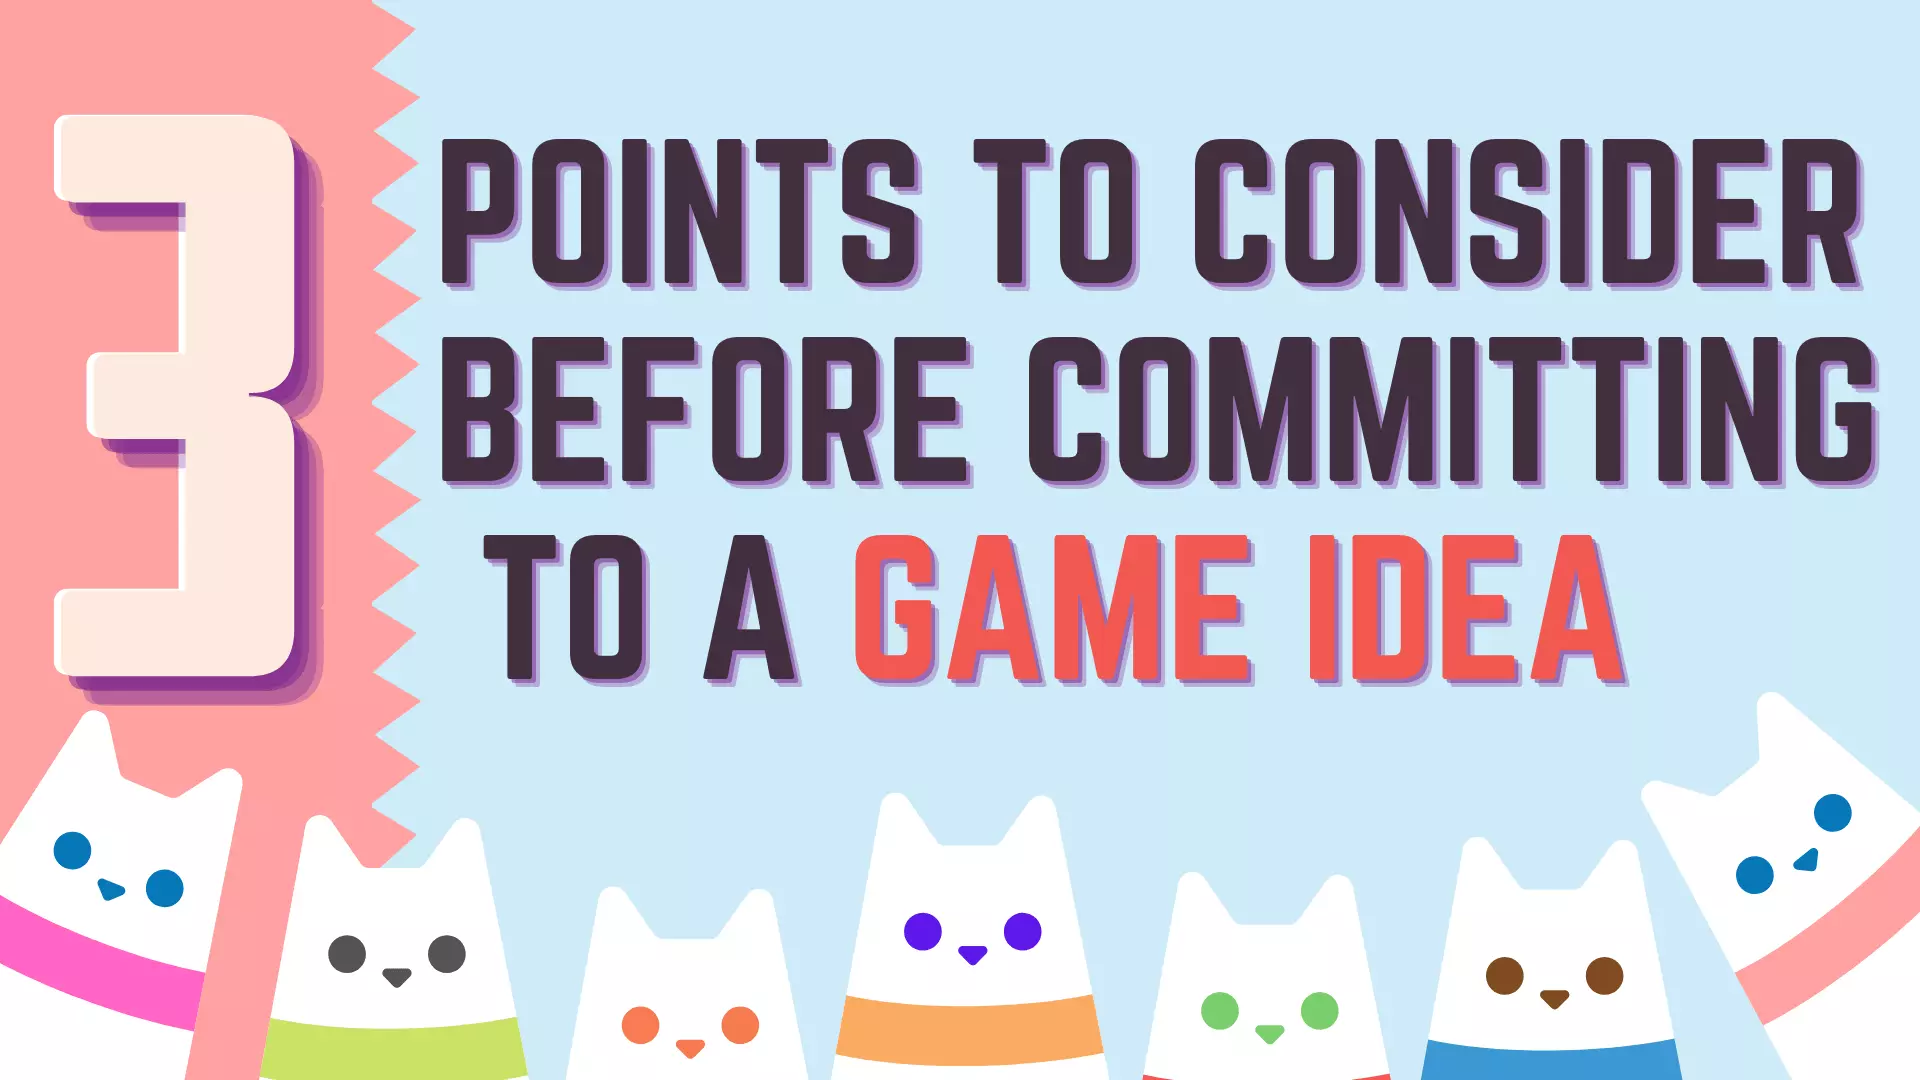 3 Points To Consider Before Committing To Your Game Idea - Game Development Tips - Featured Image